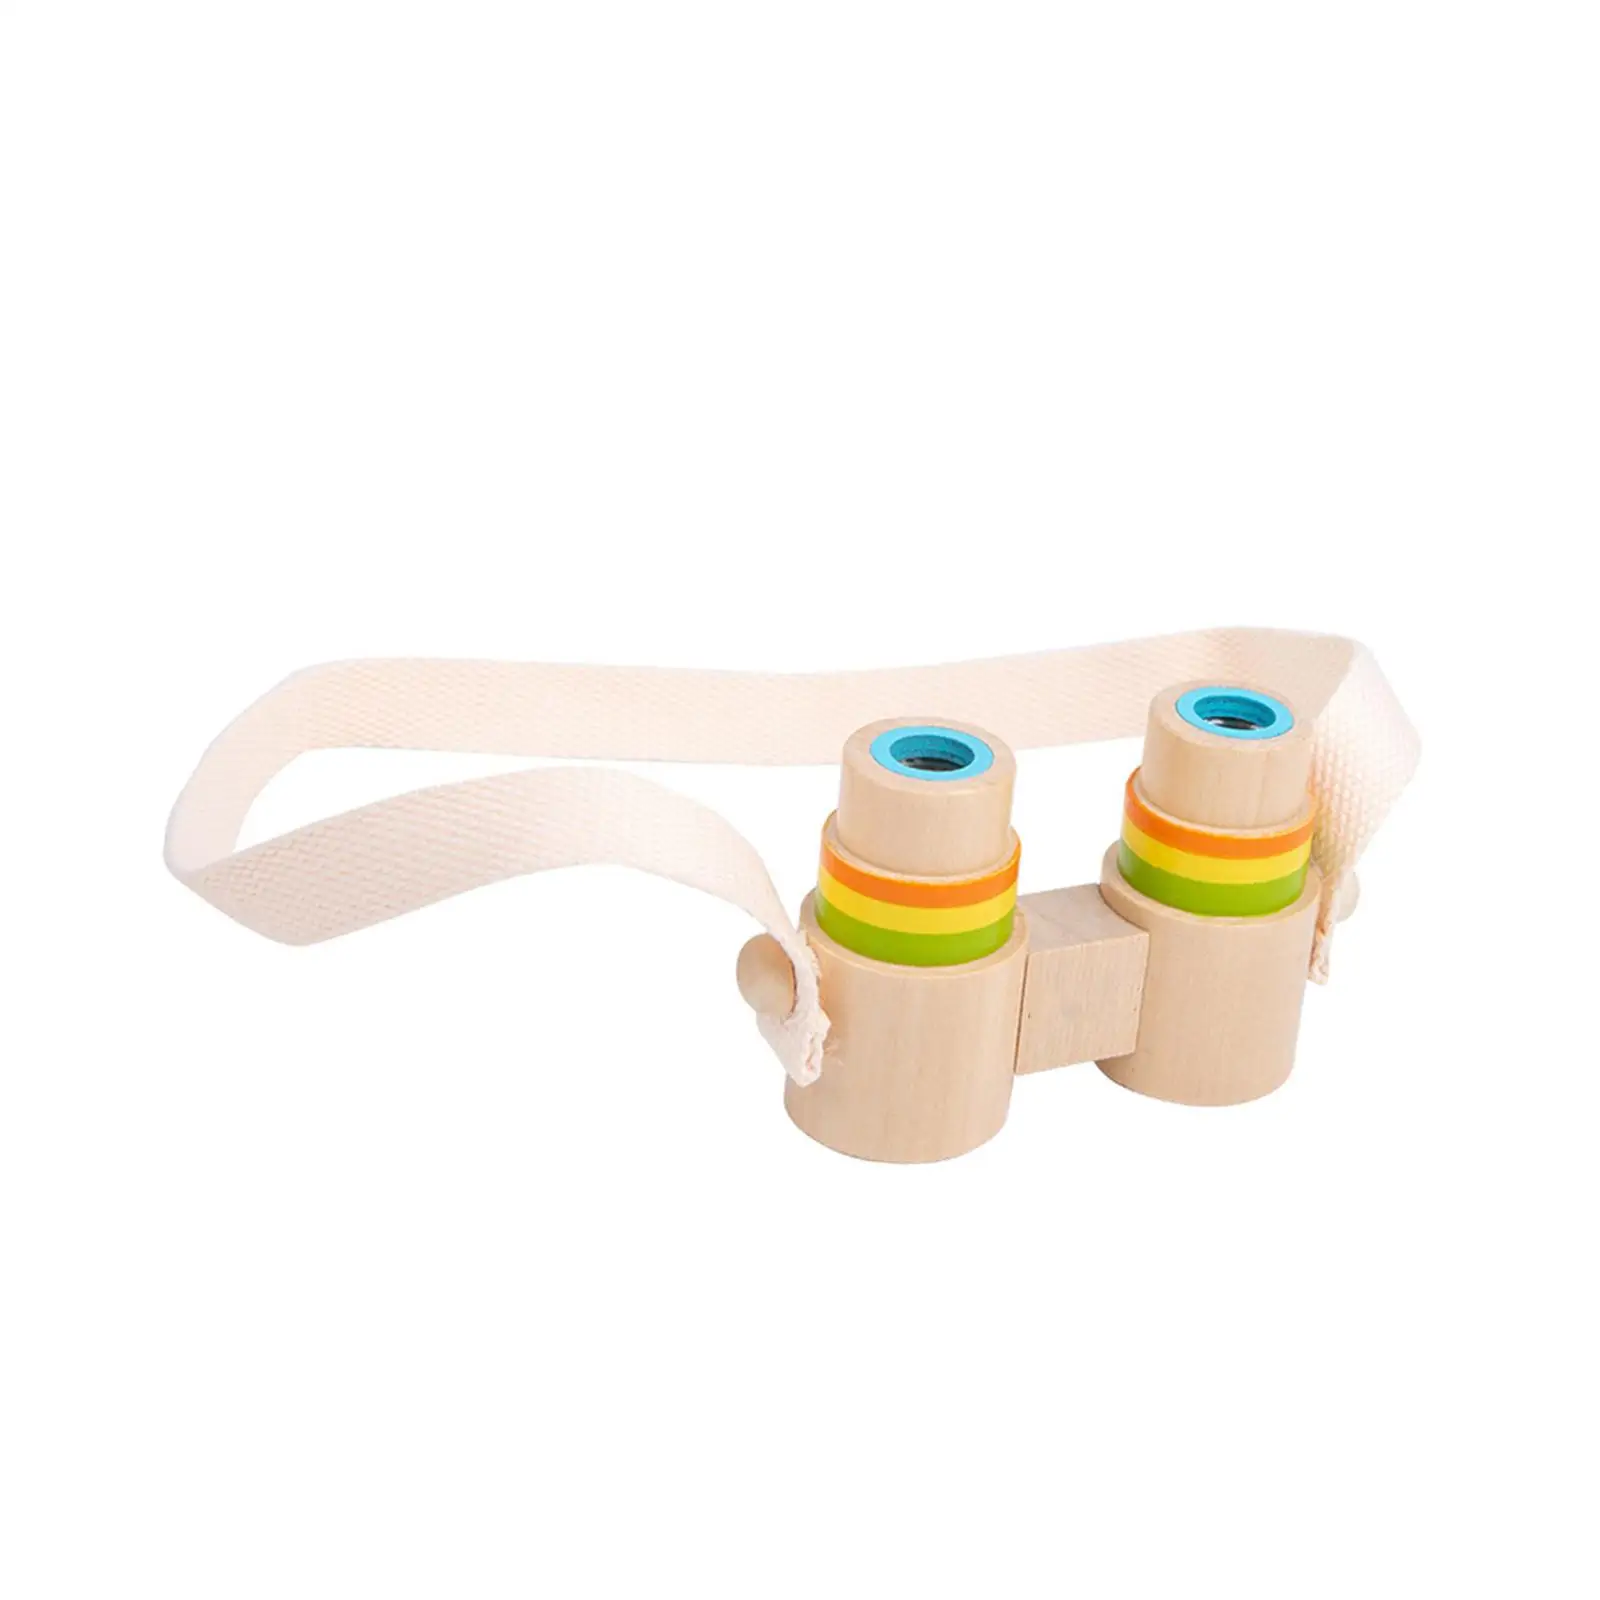 Wooden Pretend Play Binoculars Toy Children Magnification Toy for Toddlers